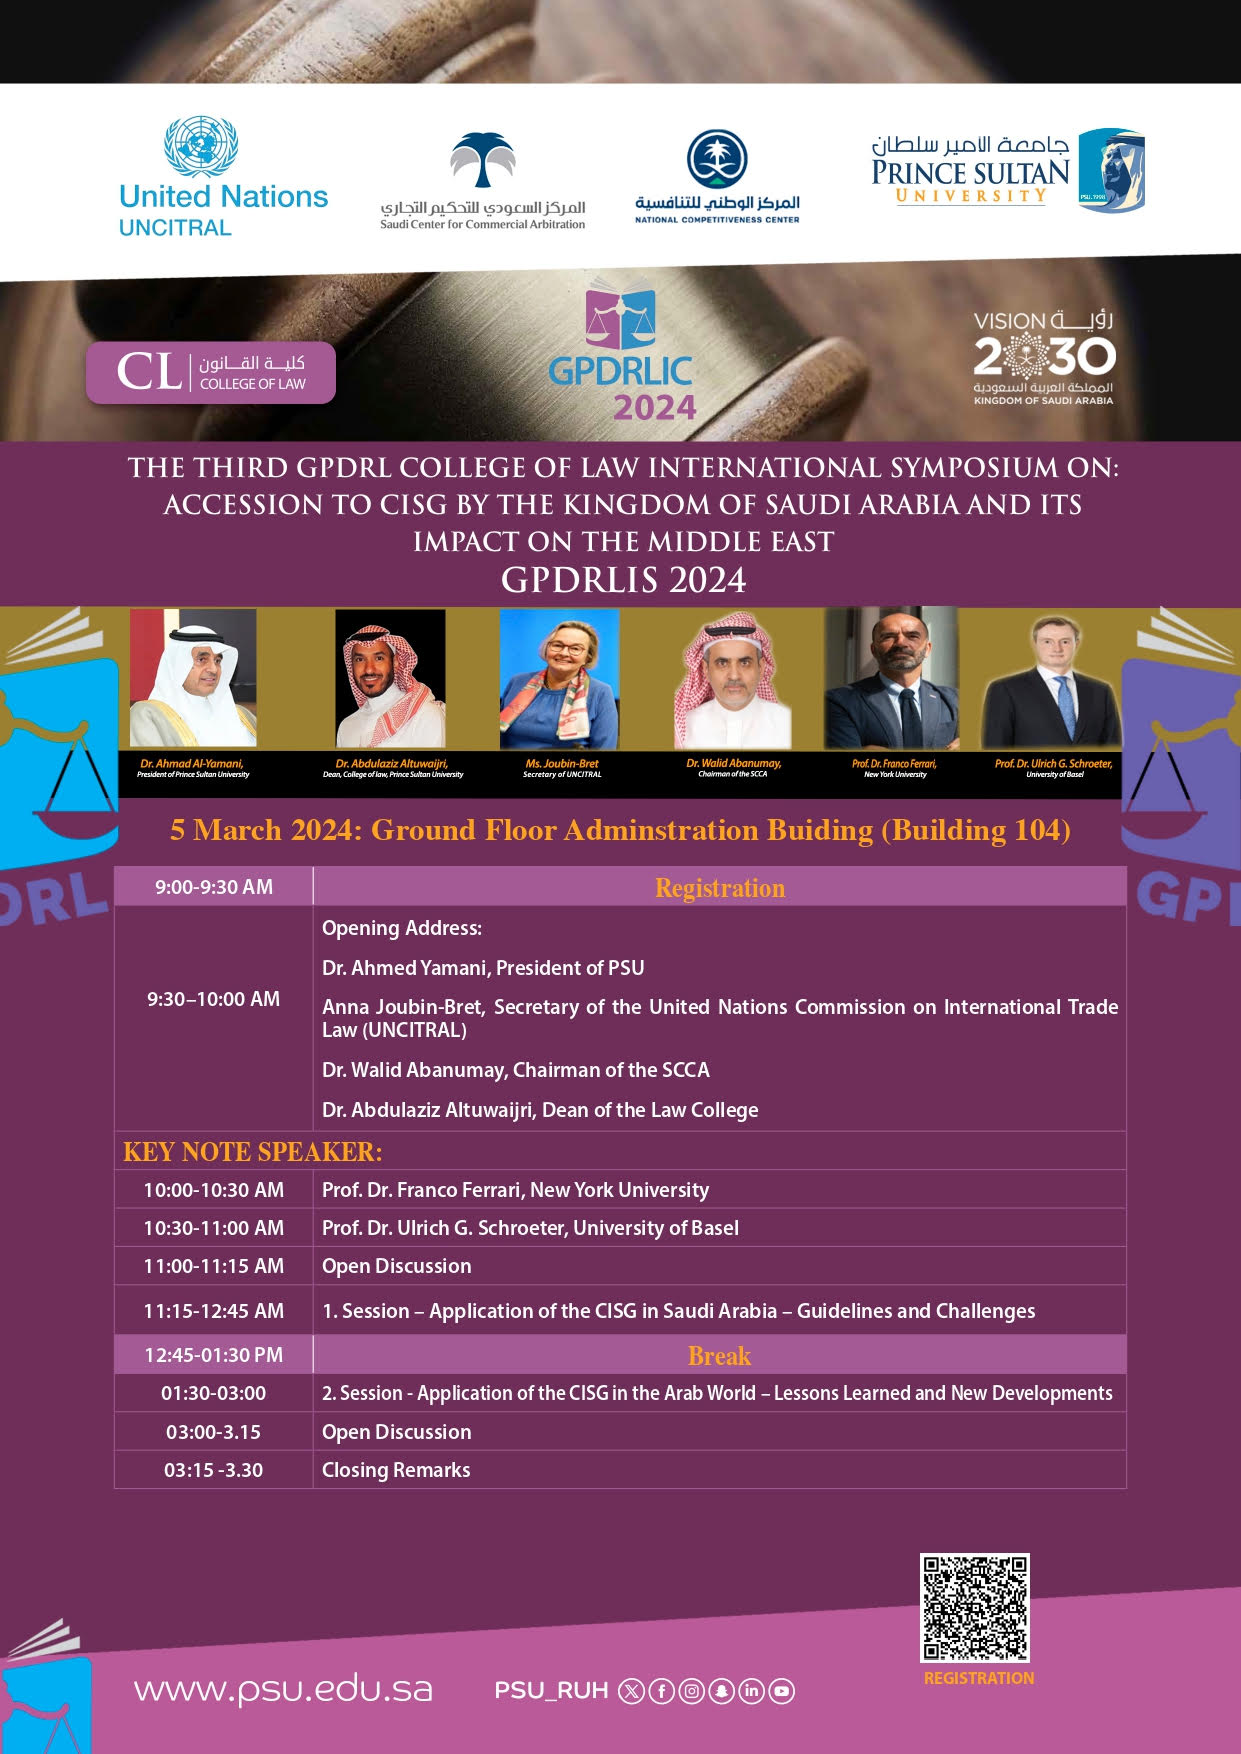 THE THIRD GPDRL COLLEGE OF LAW INTERNATONAL SYMPOSIUM ON: ACCESSION TO CISG BY THE KINGDOM OF SAUDI ARABIA AND ITS IMPACT ON THE MIDDLE EAST